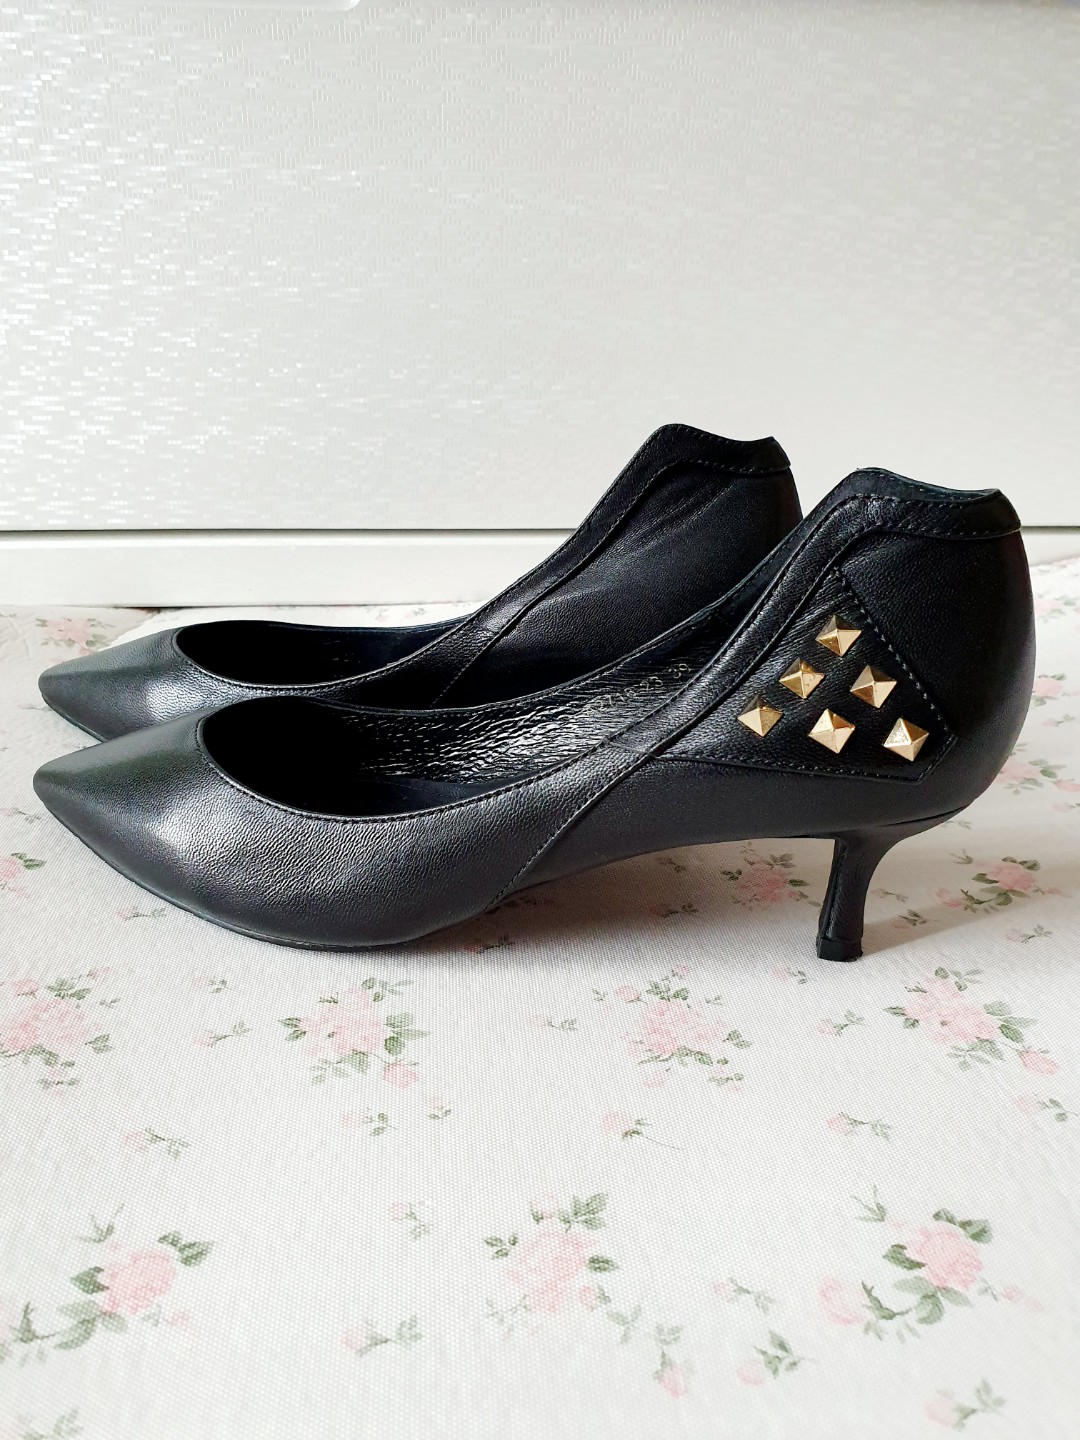 black heels with gold studs